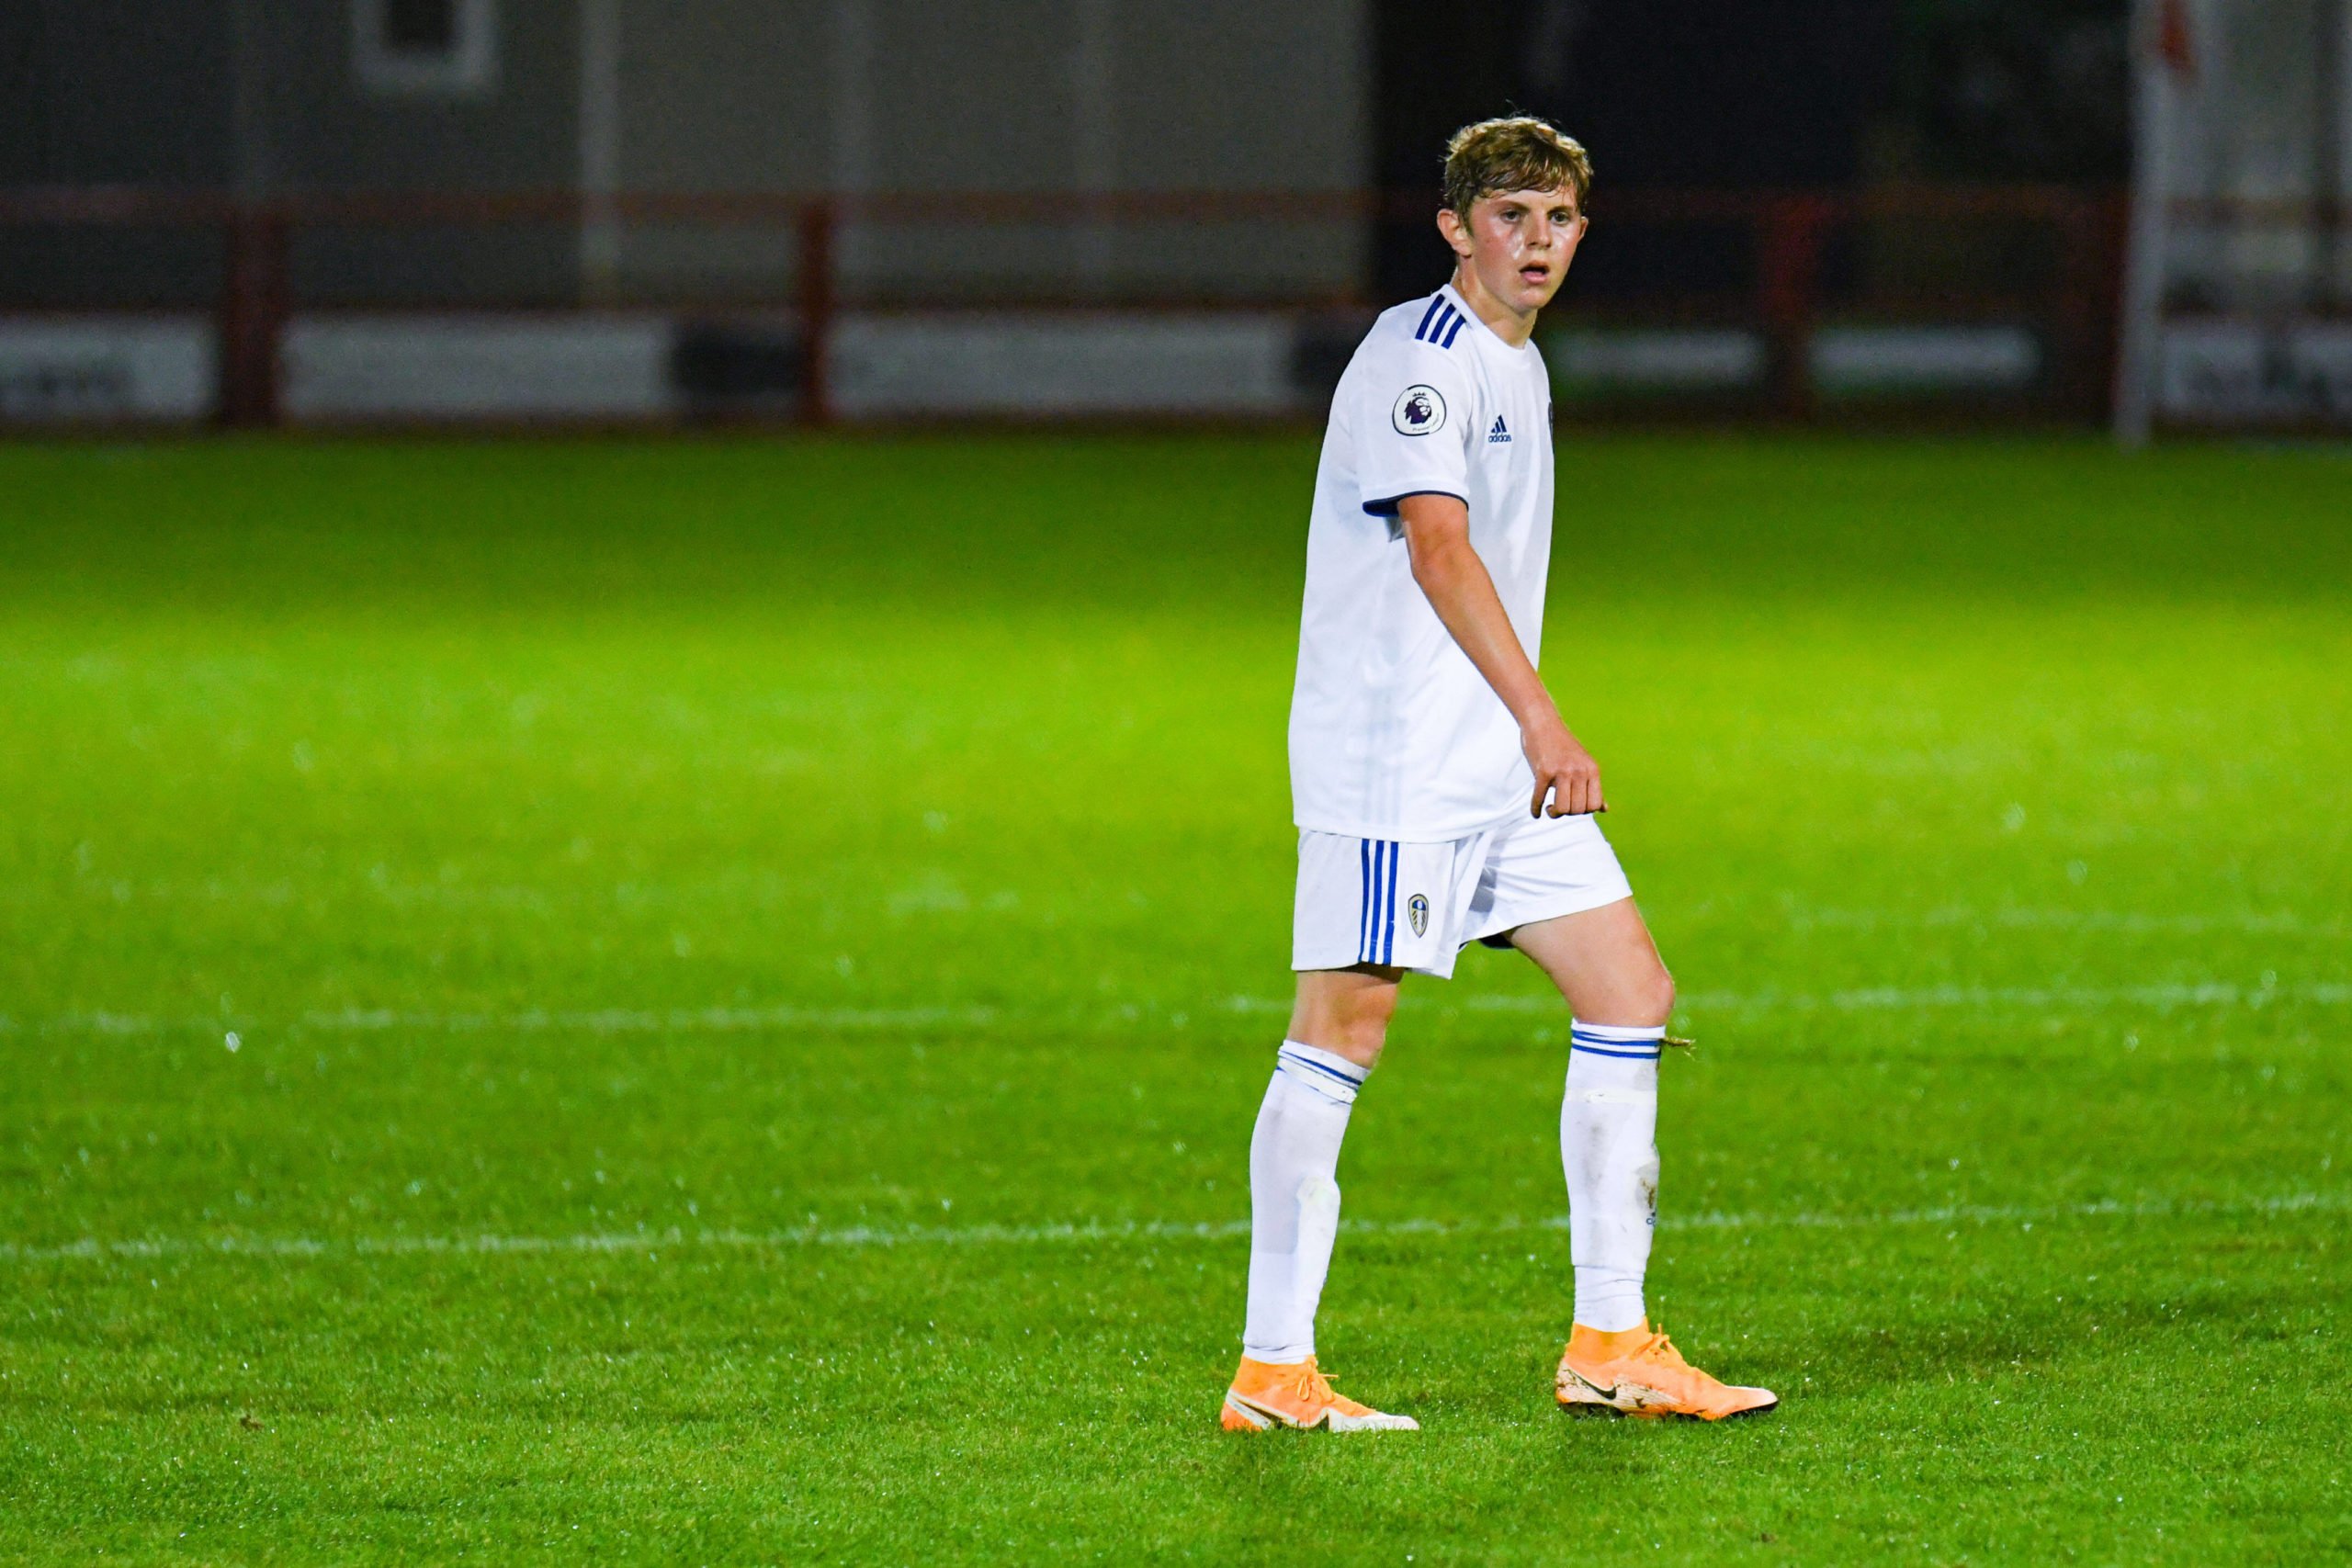 Max Dean could be set for an improved deal at Leeds United - One for the future?